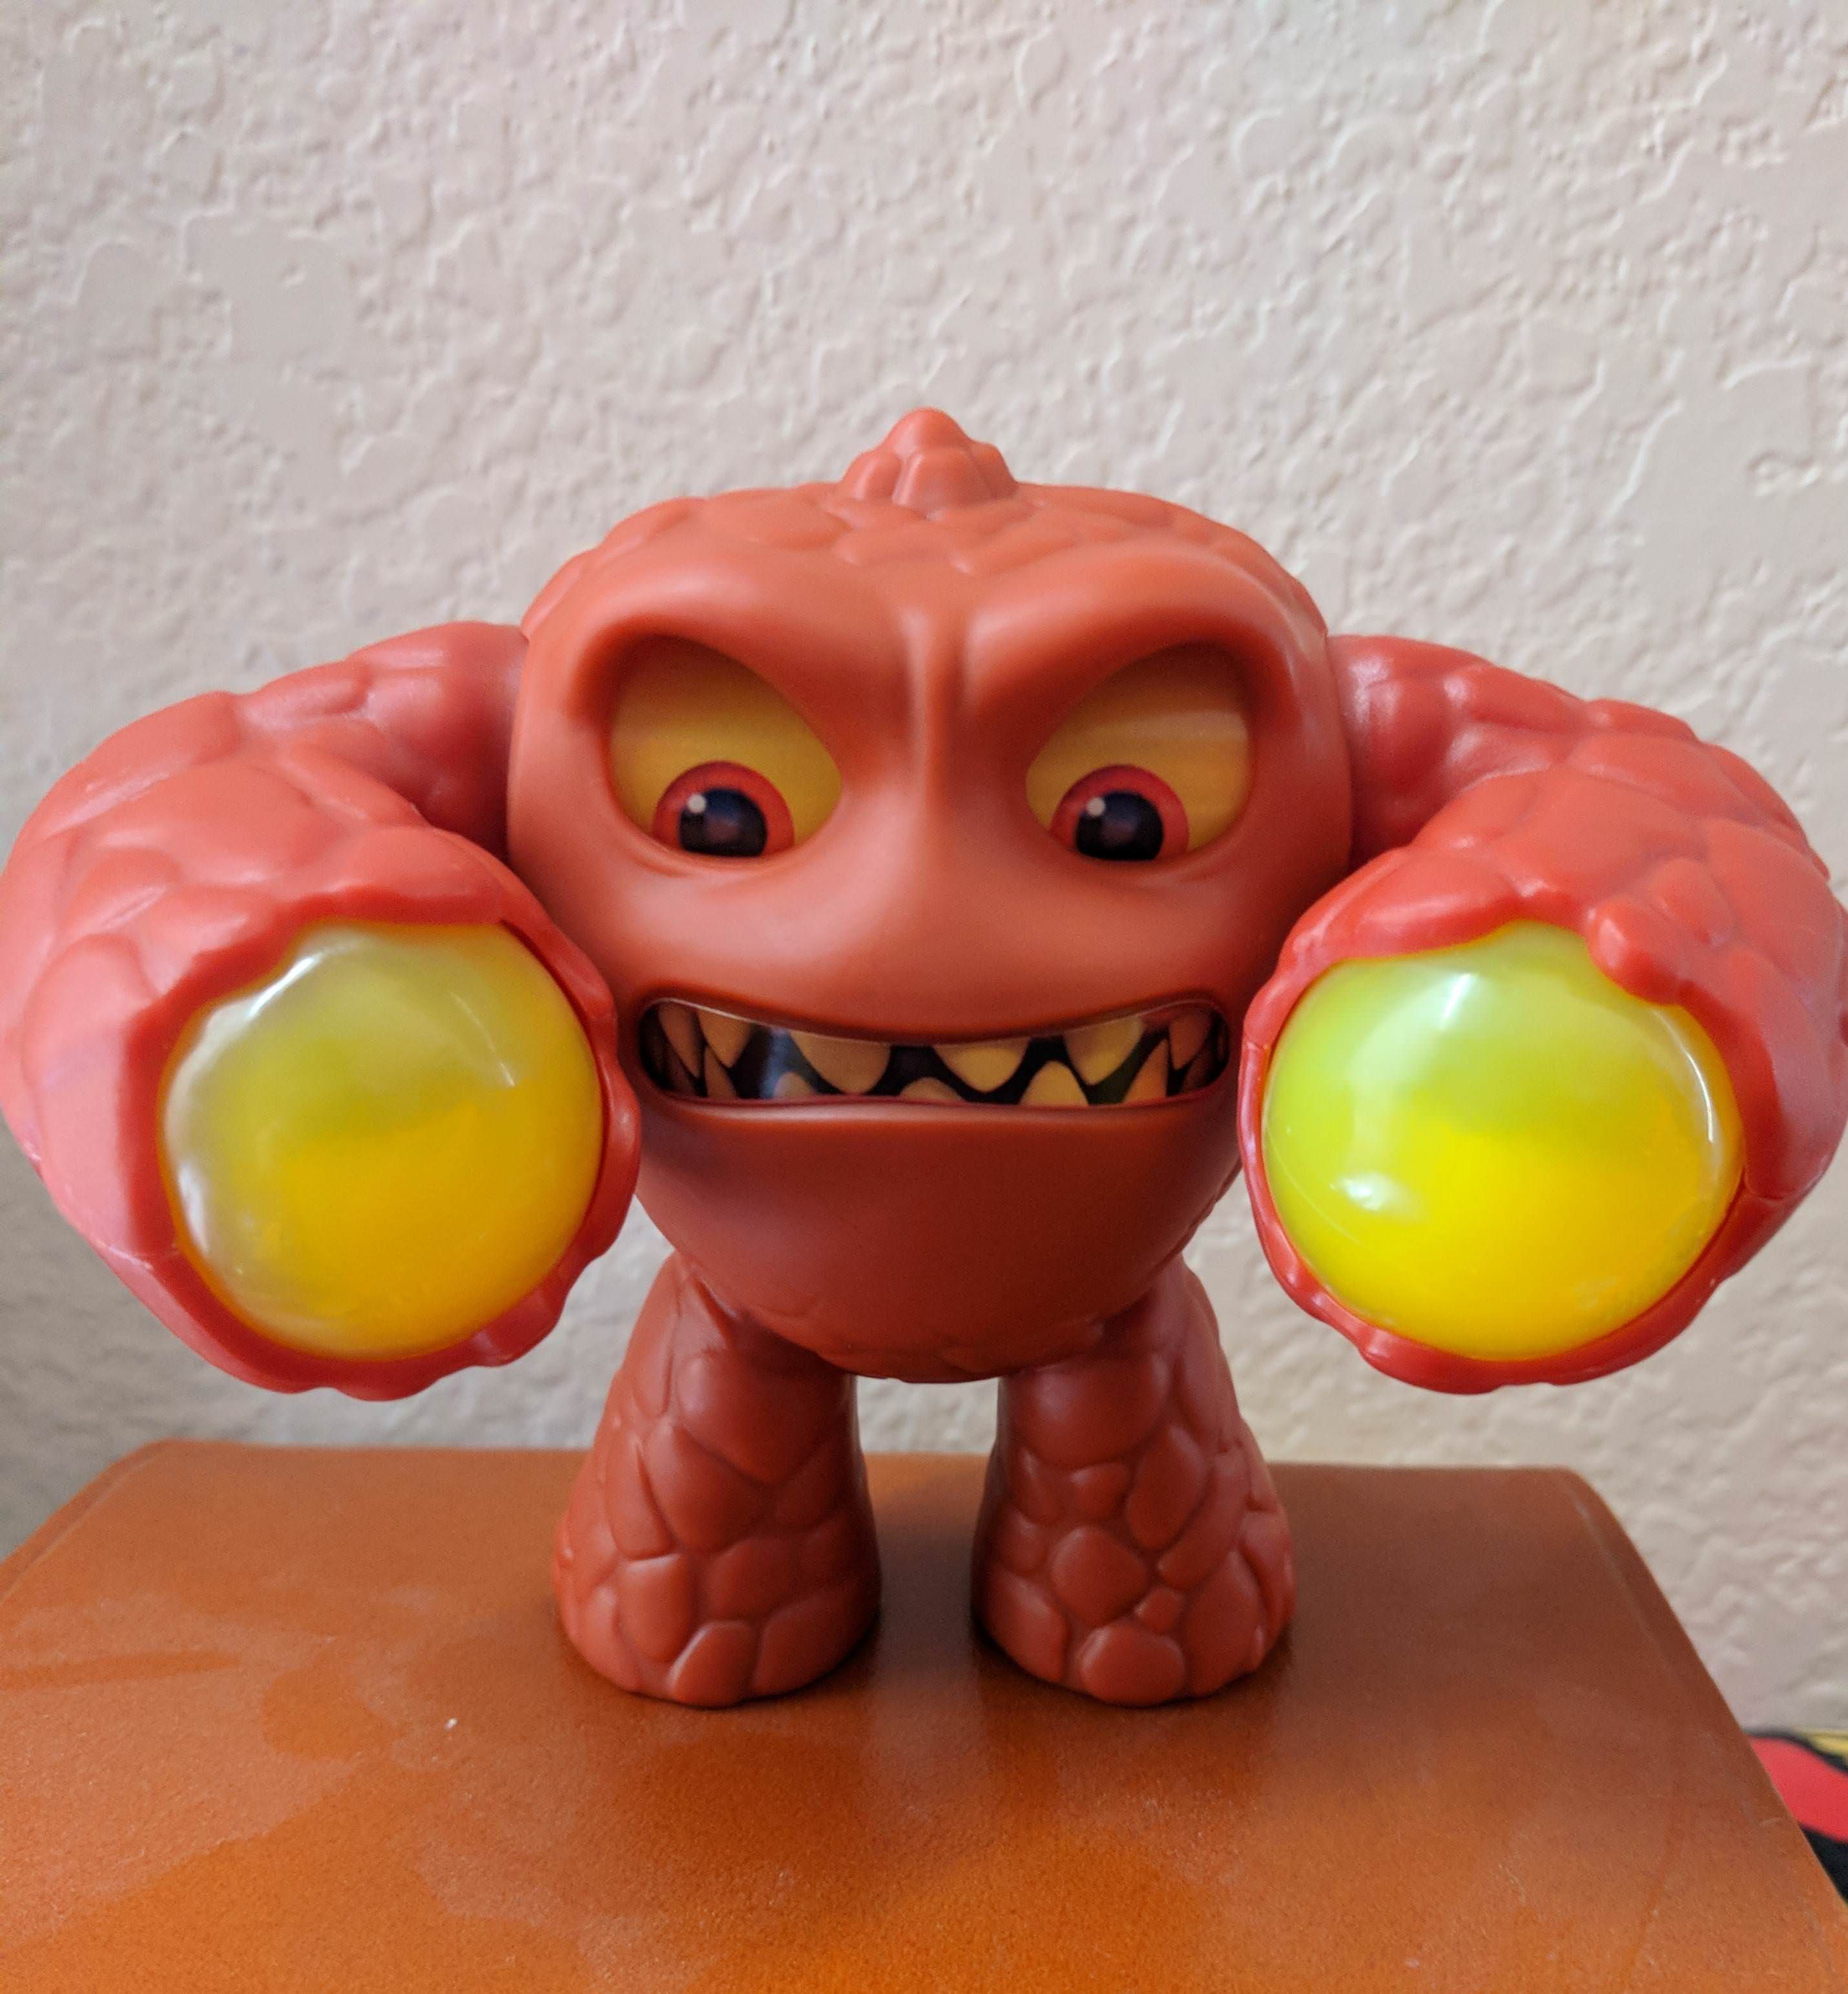 This Skylanders McDonald's toy looks like an angry uterus, I now call it the period monster.